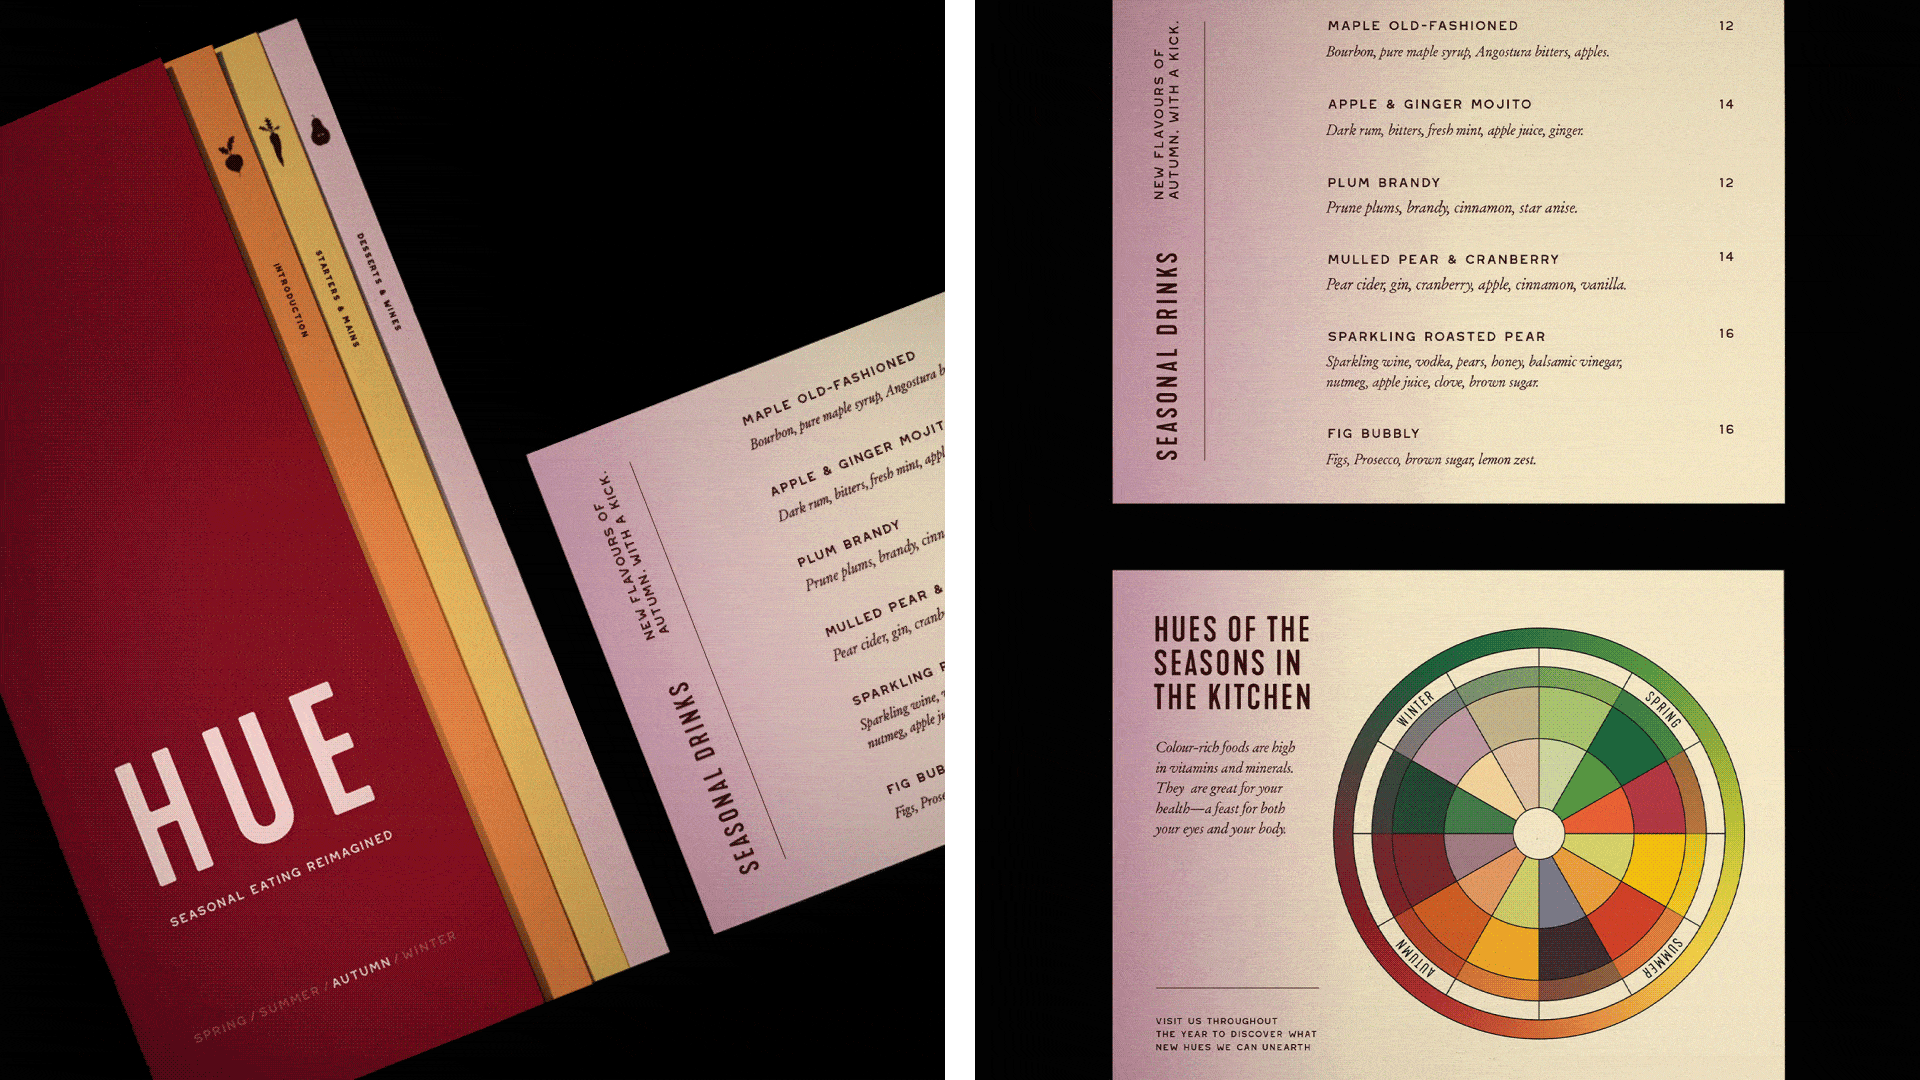 Series of images depicting a cookbook, labels, and menu on a black background.